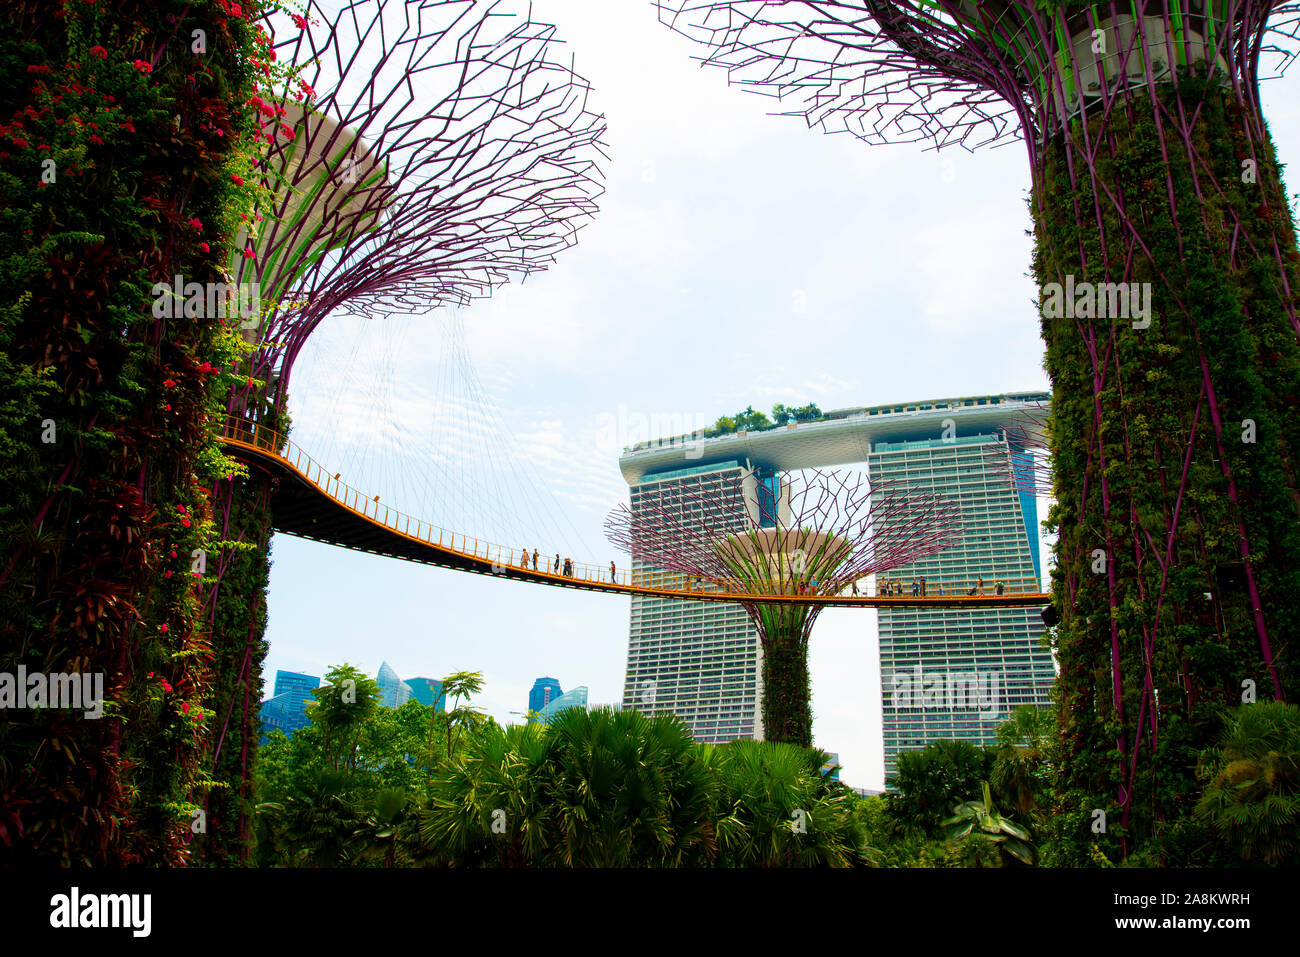 OCBC Skyway in the Supertree Grove at the Garden by the Bay - Singapore Stock Photo